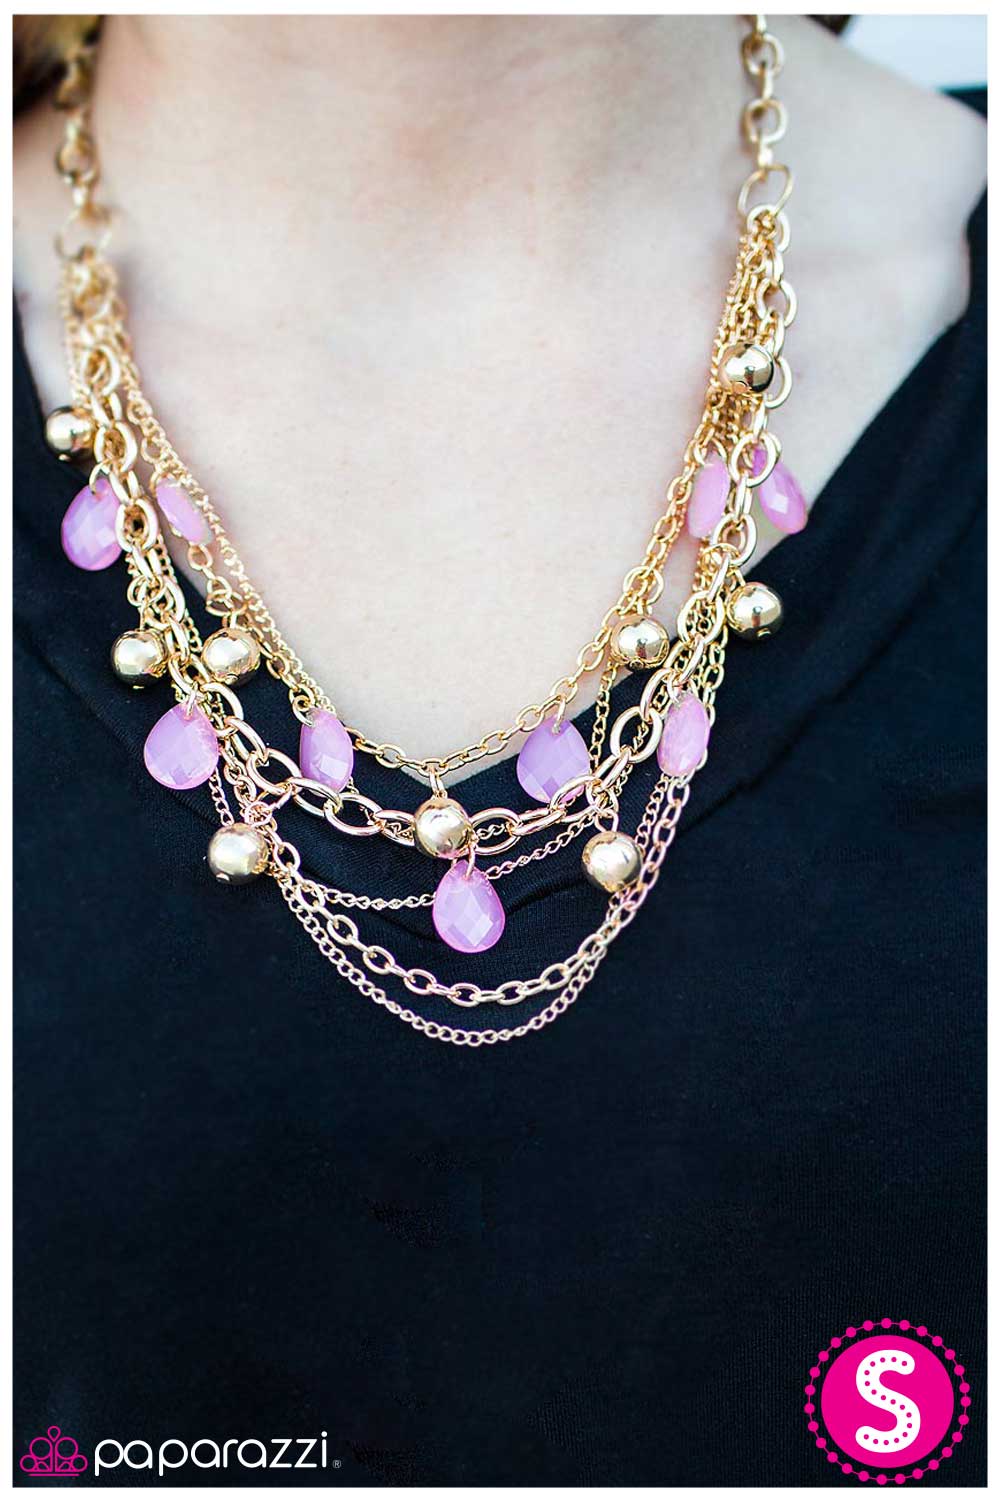 five-dollar-jewelry-cut-and-run-pink-necklace-paparazzi-accessories